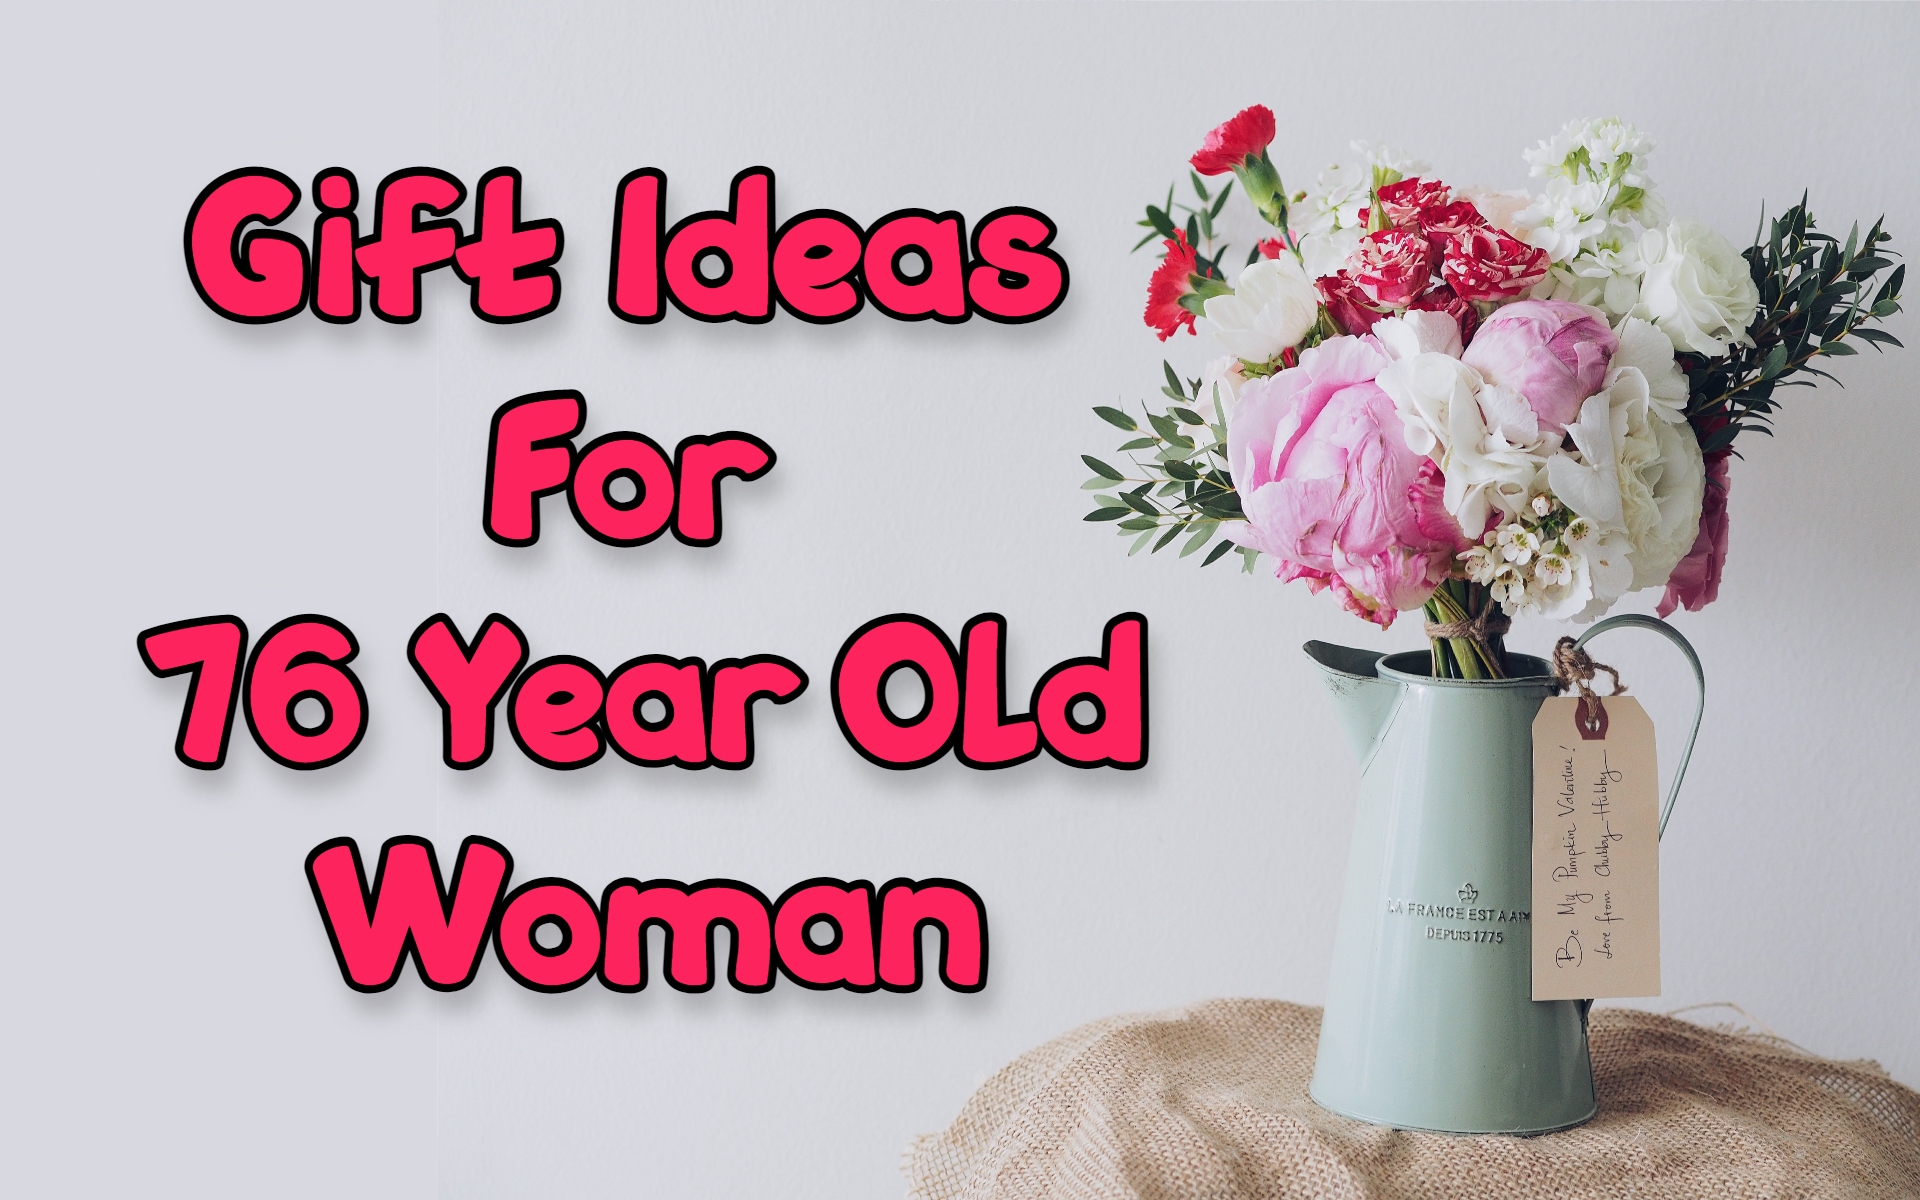 Cover image of gift ideas for 76-year-old woman by Giftsedge